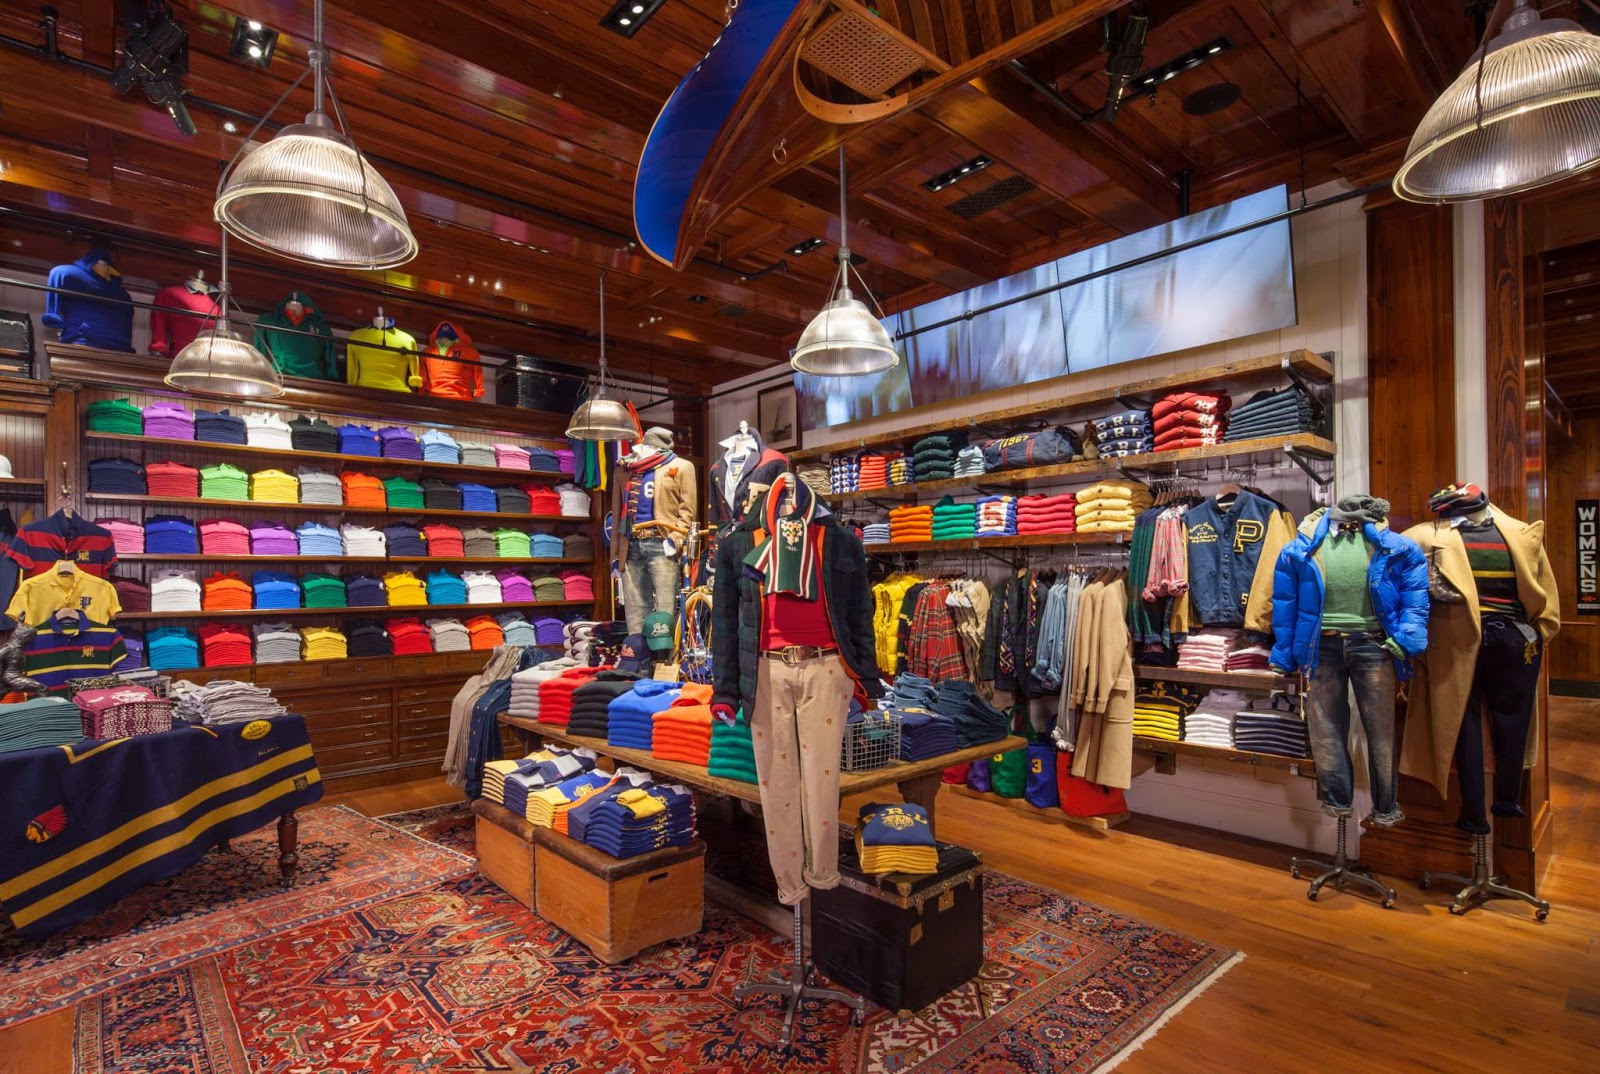 CHAD'S DRYGOODS: POLO RALPH LAUREN GLOBAL FLAGSHIP STORE, NEW YORK